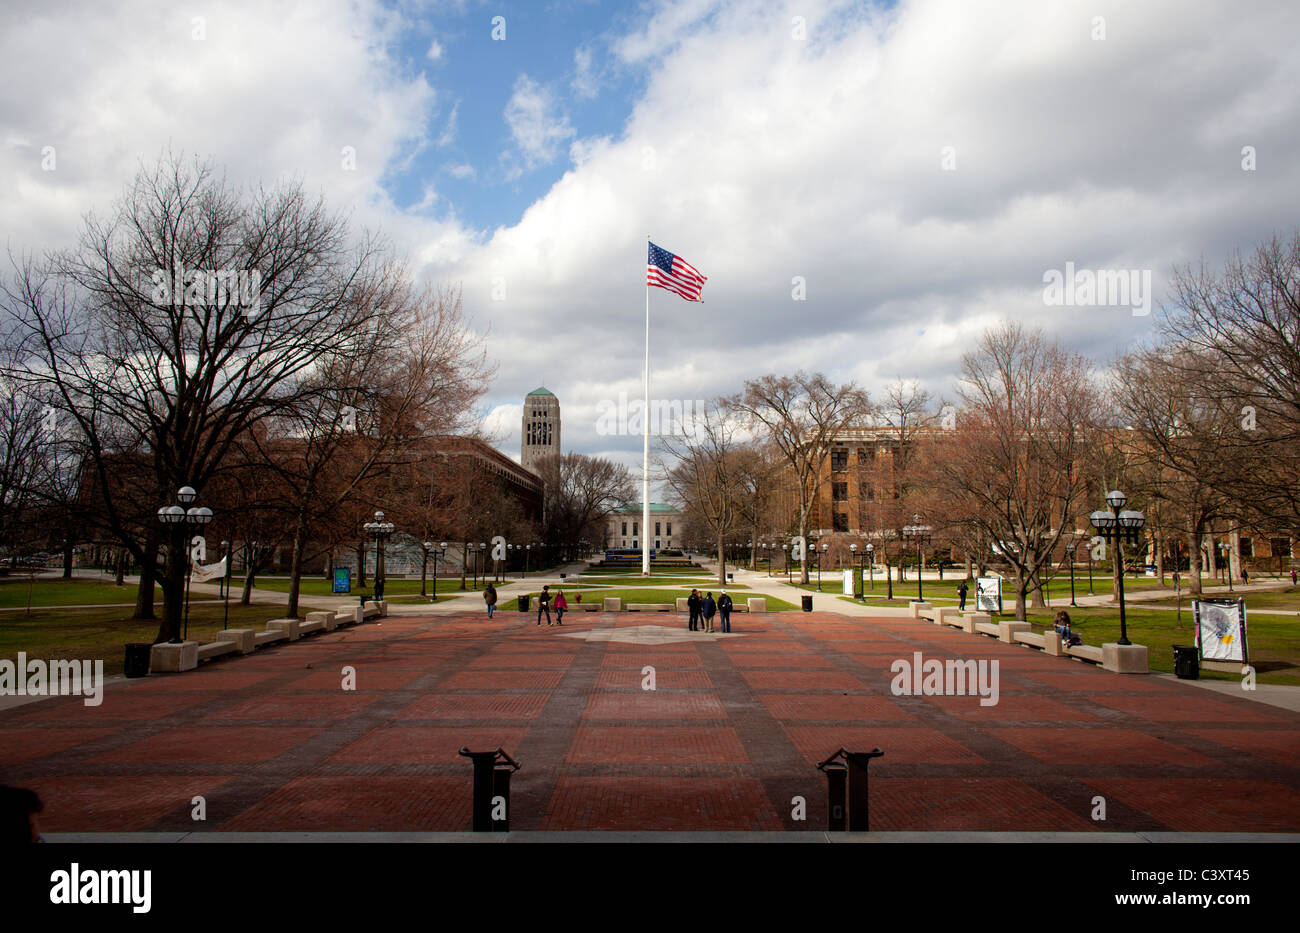 General view of the University of Michigan in Ann Arbor, Michigan, USA. Stock Photo